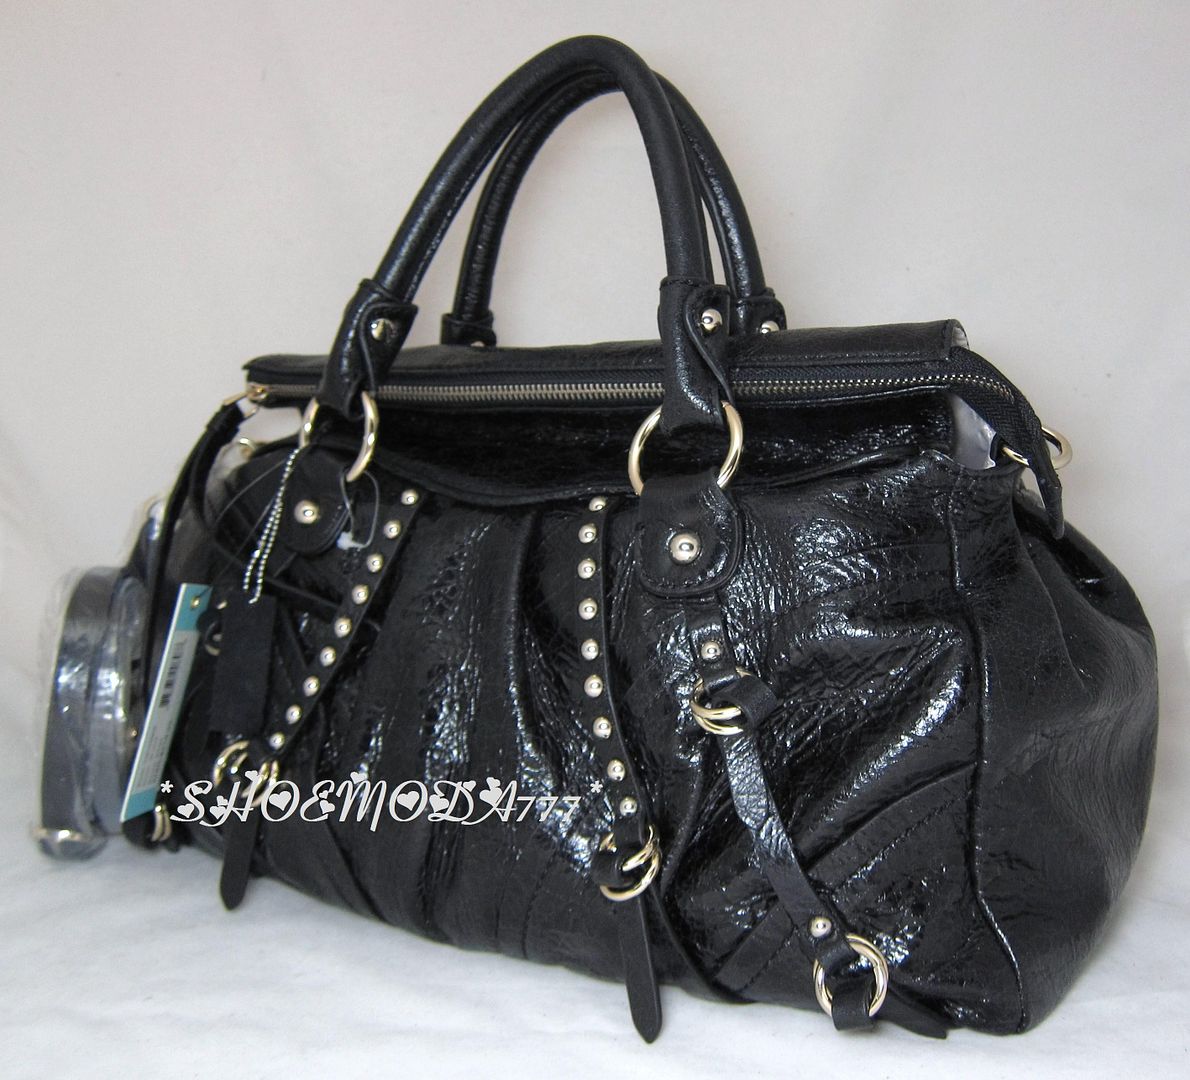 $278 GUESS by Marciano Genuine Leather DANE Studs Purse Bag Satchel Sac Black